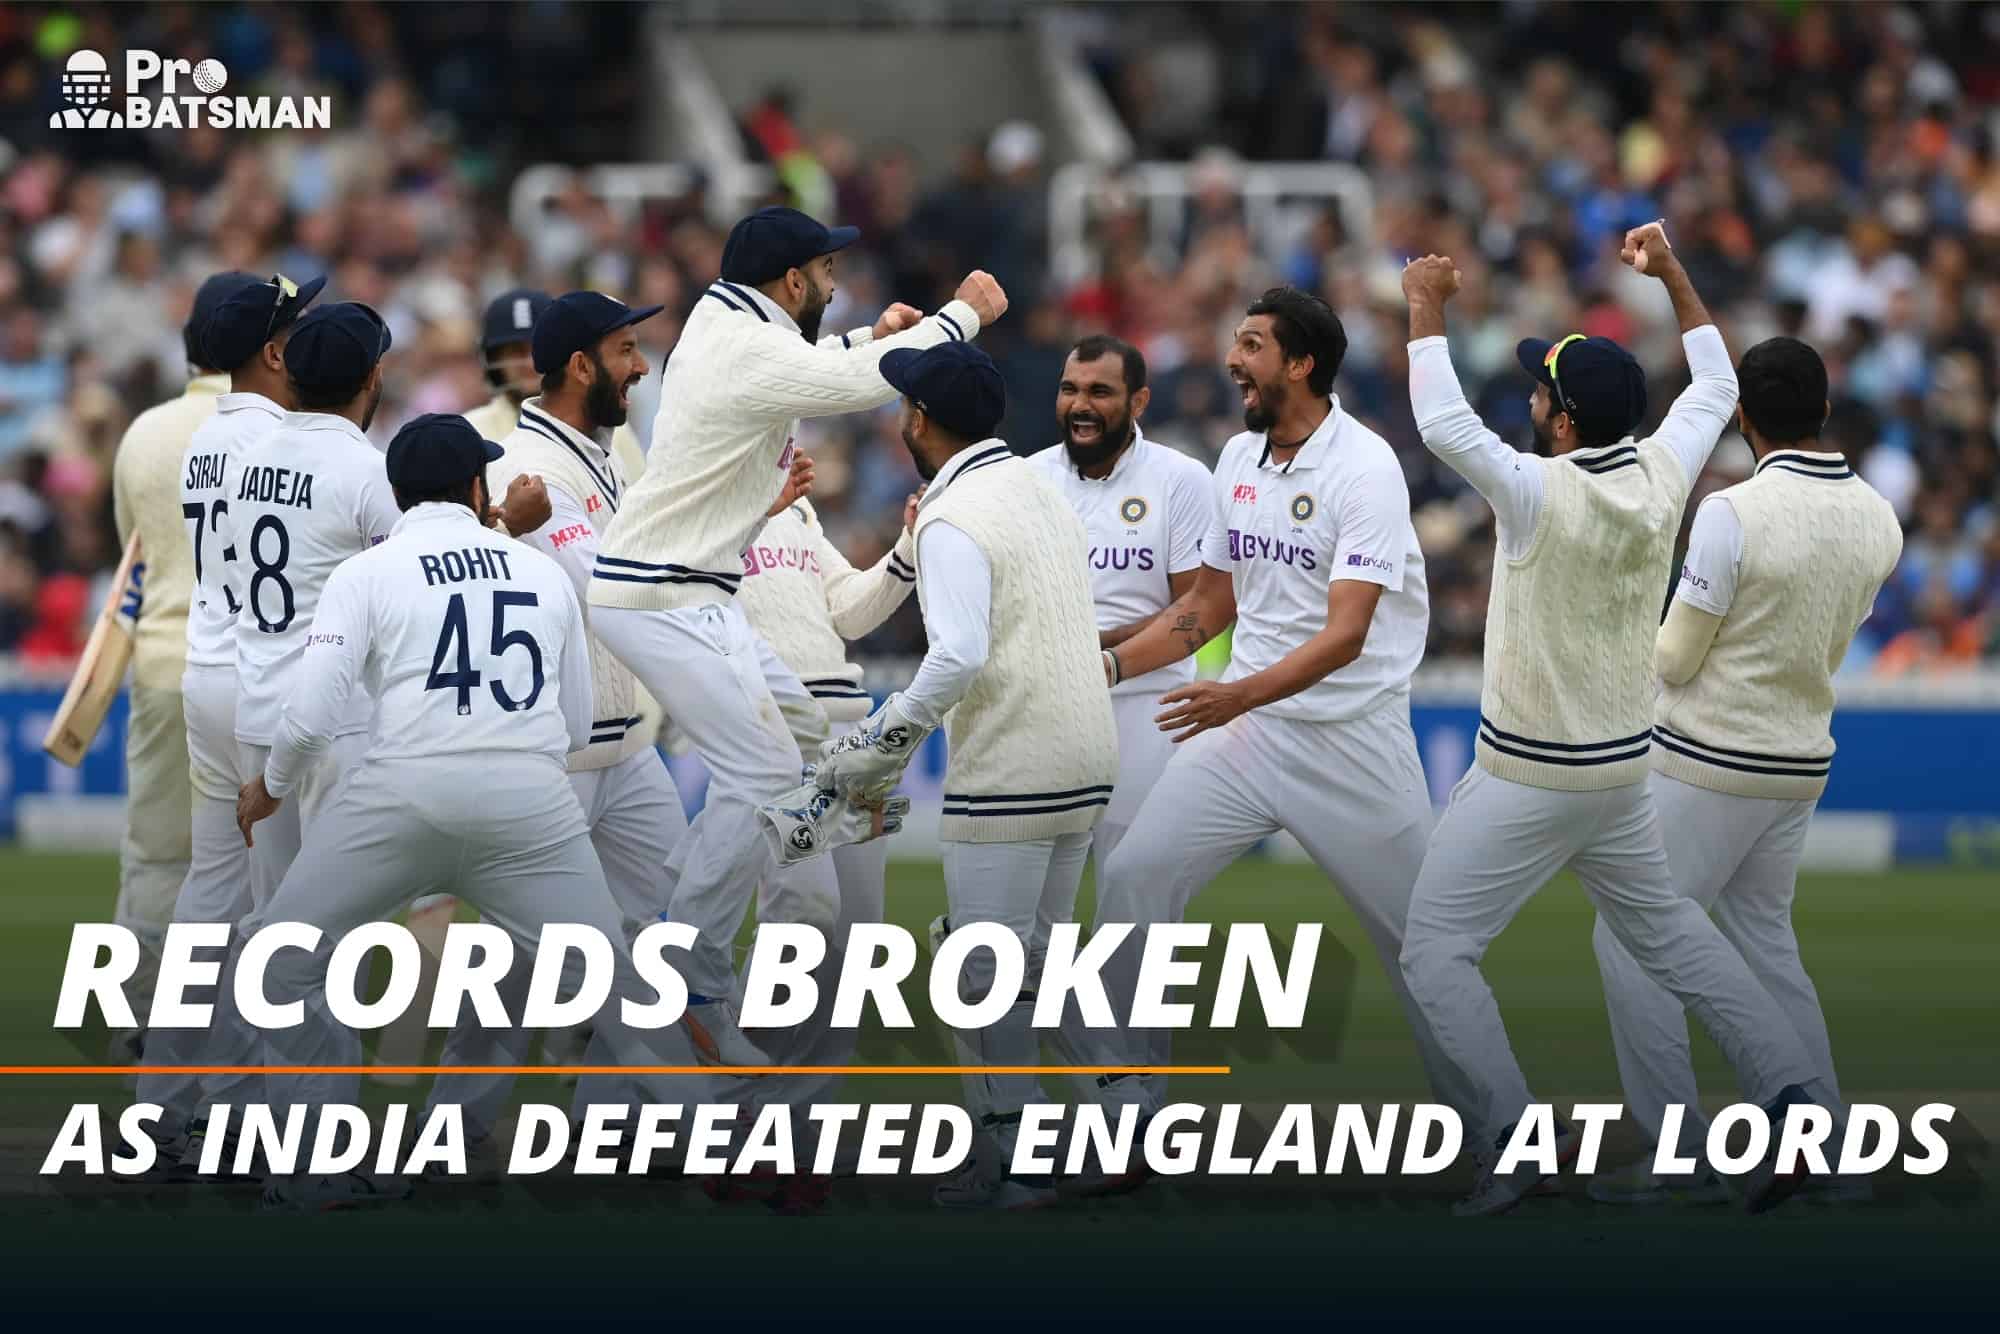 5 Massive Records Broken As India Register Their Third Ever Test Victory At Lord's